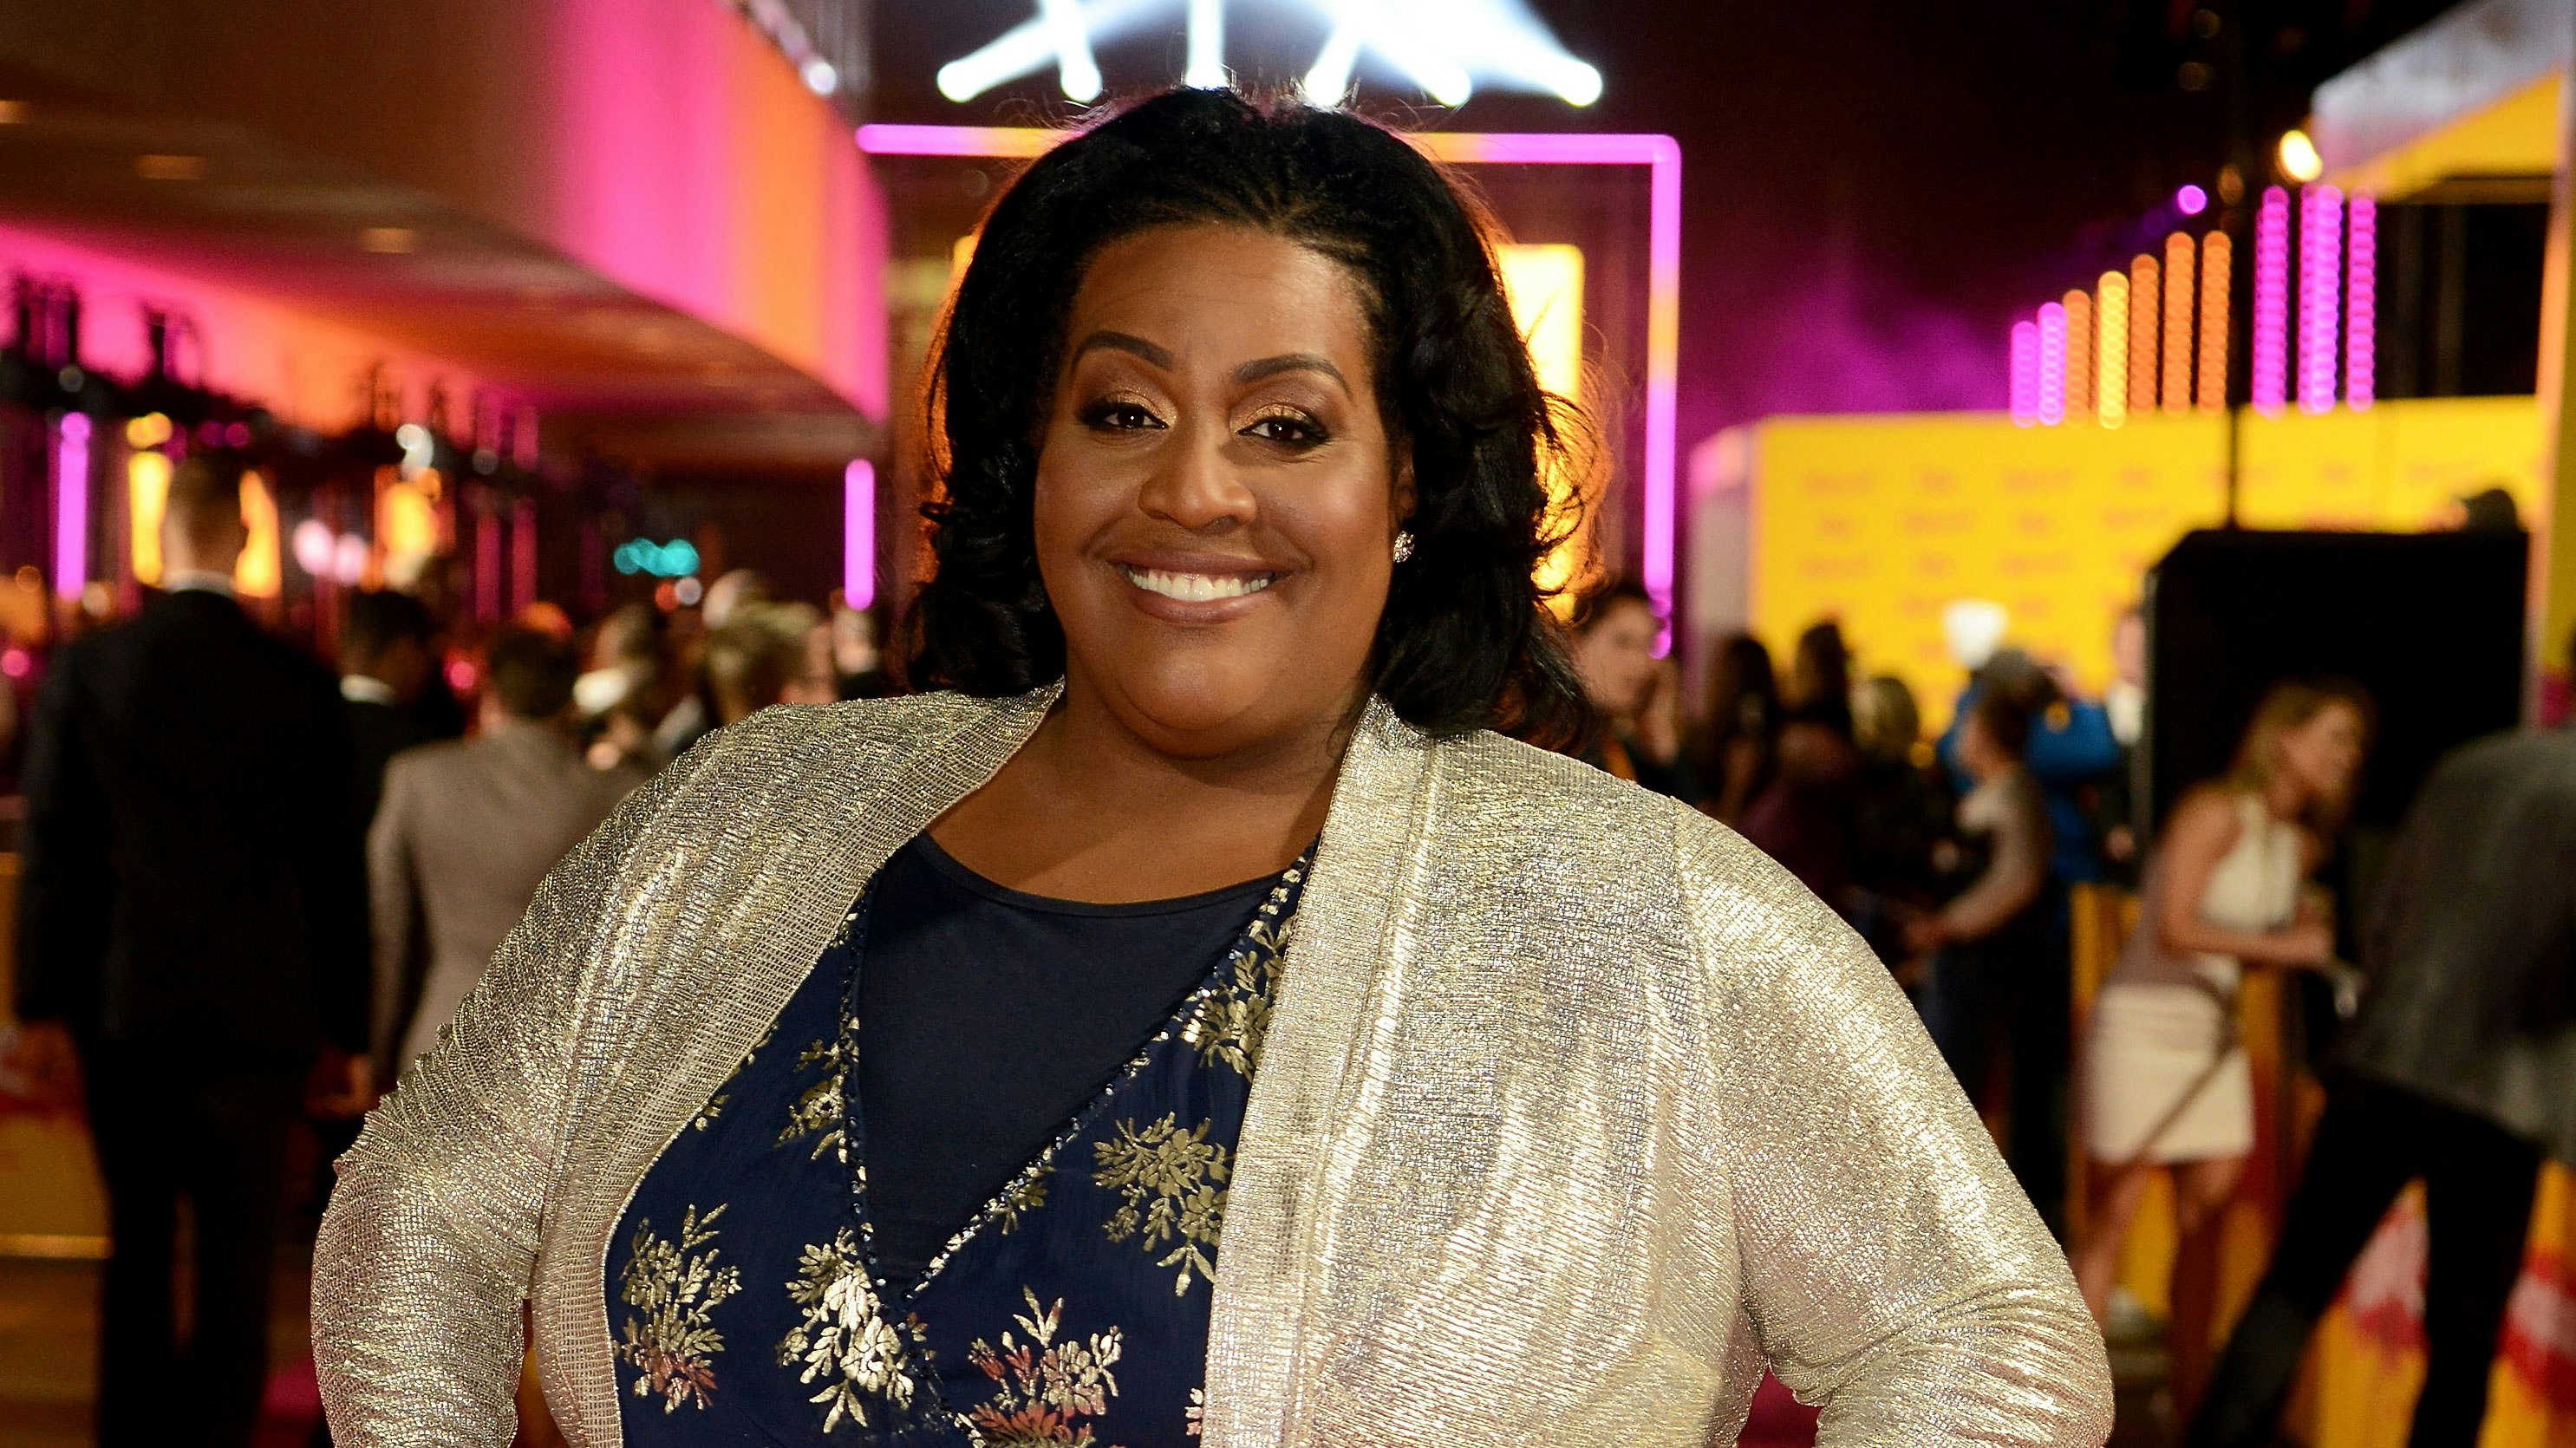 Alison Star Big Tits Porn - Alison Hammond shares incredible weight loss selfie | Diet & Body | Closer